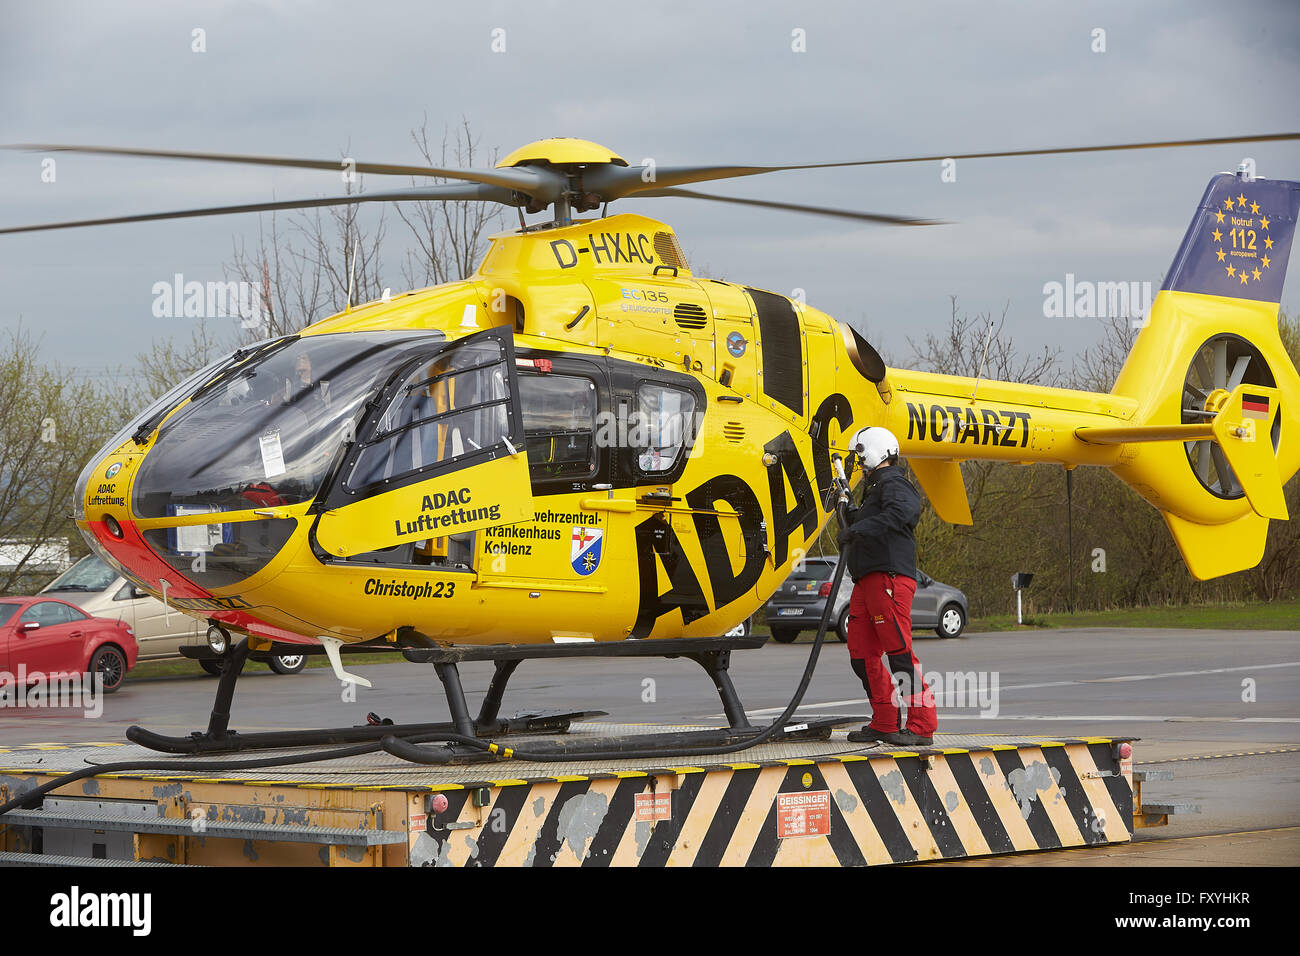 ADAC rescue helicopter Eurocopter EC 135 refueling, air rescue, emergency, Germany Stock Photo